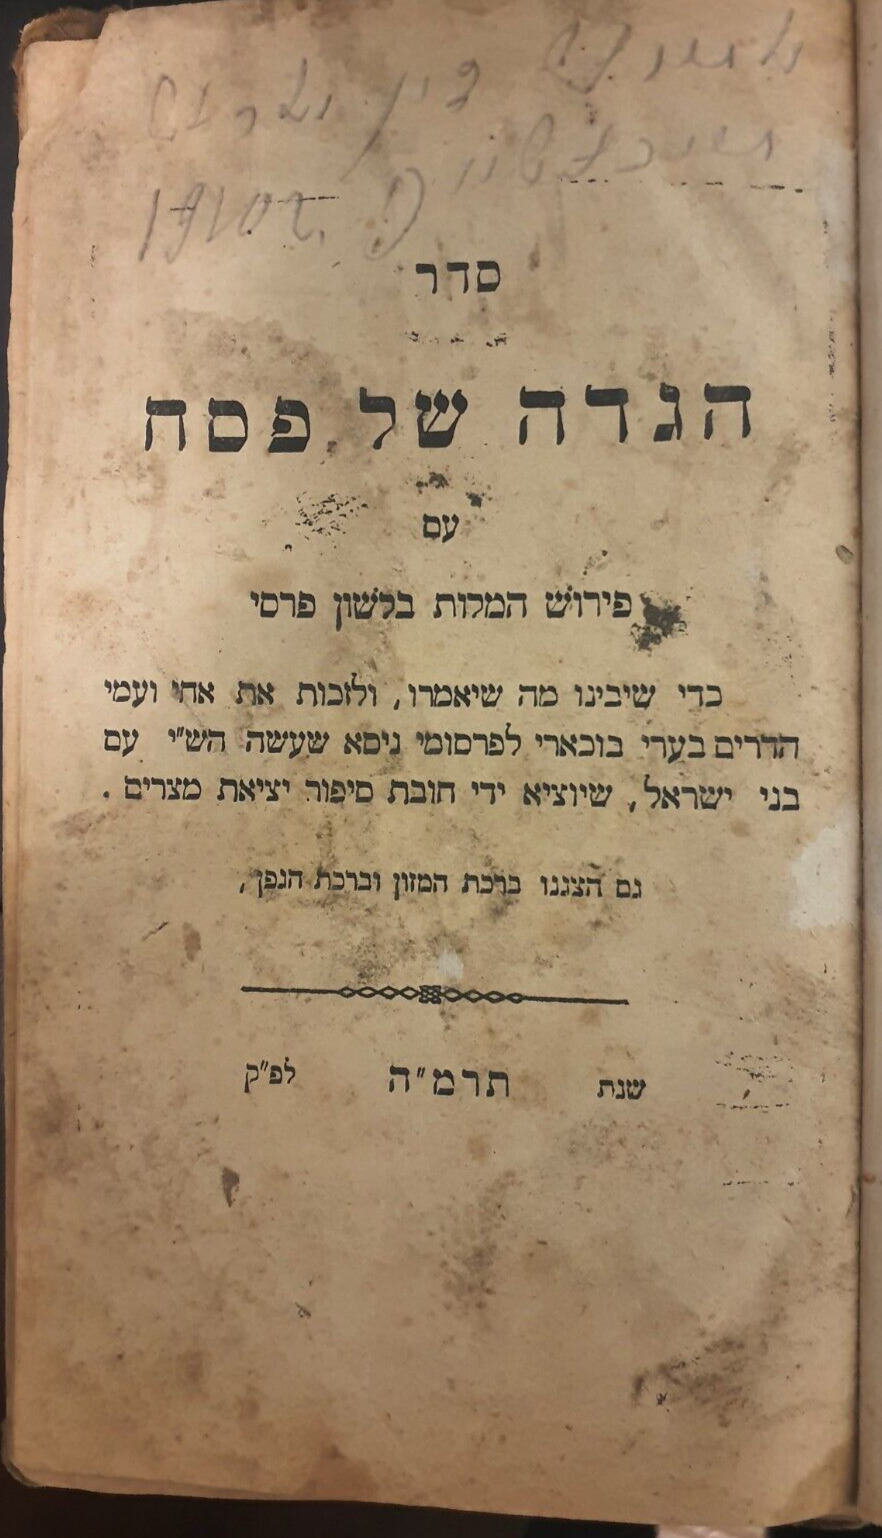 First Haggadah with Judeo-Persian translation